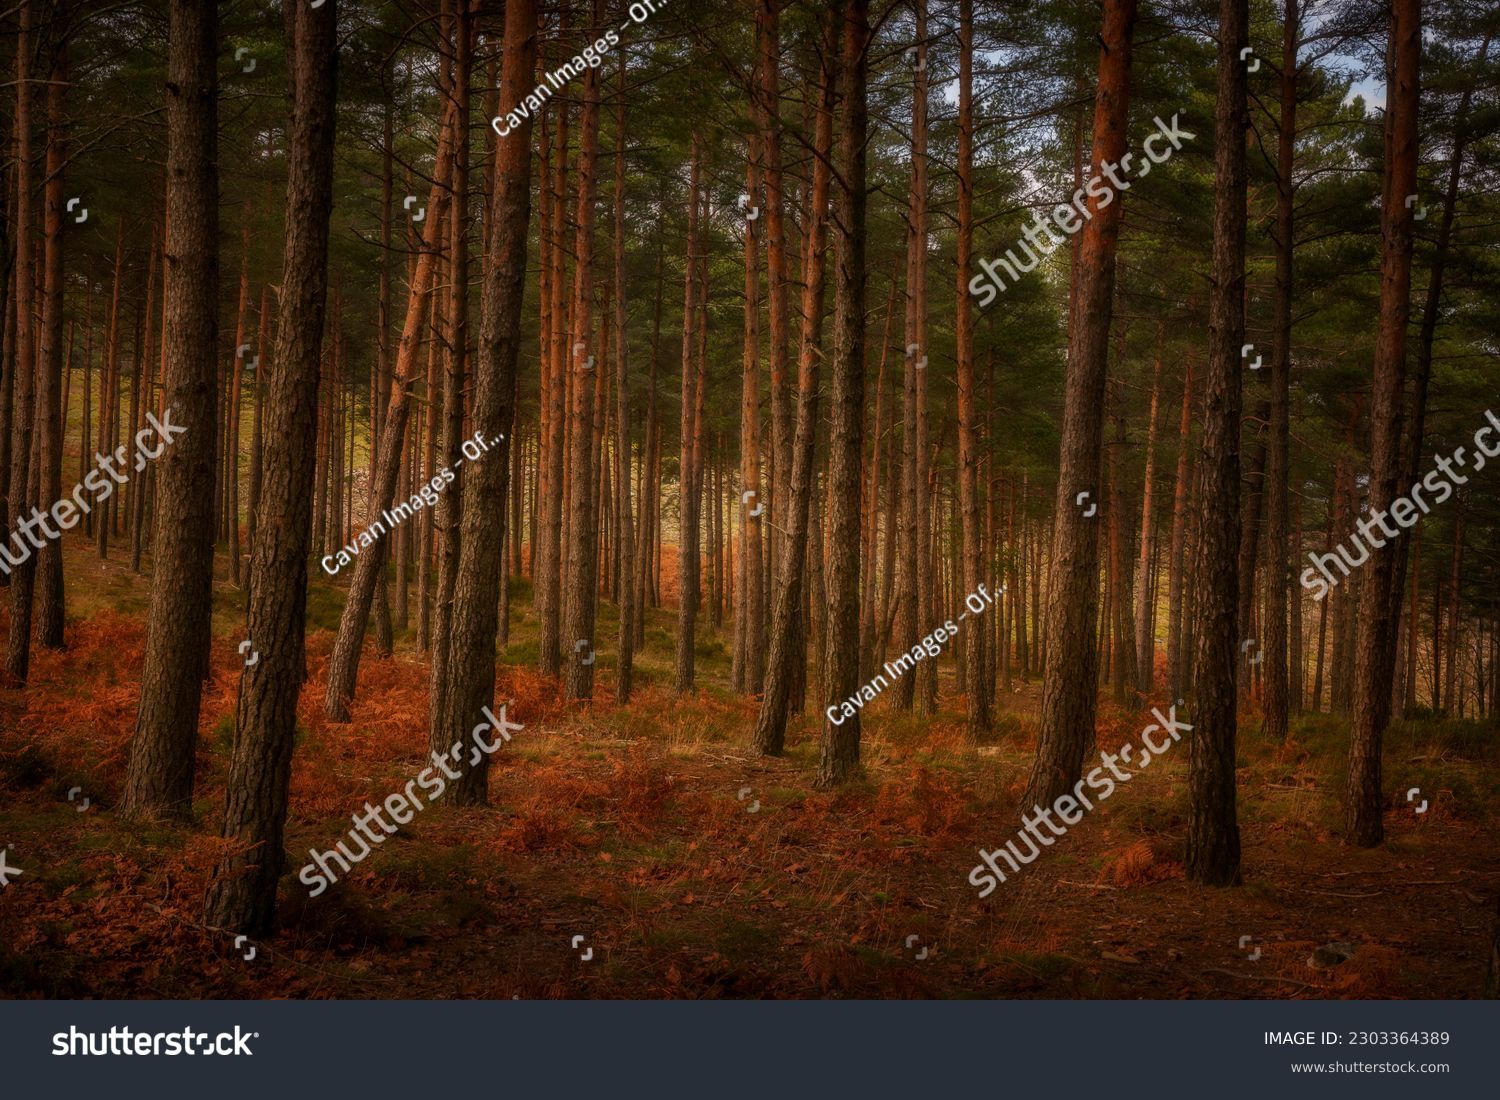 Royalty Free Stock Images For Creative Projects | Shutterstock